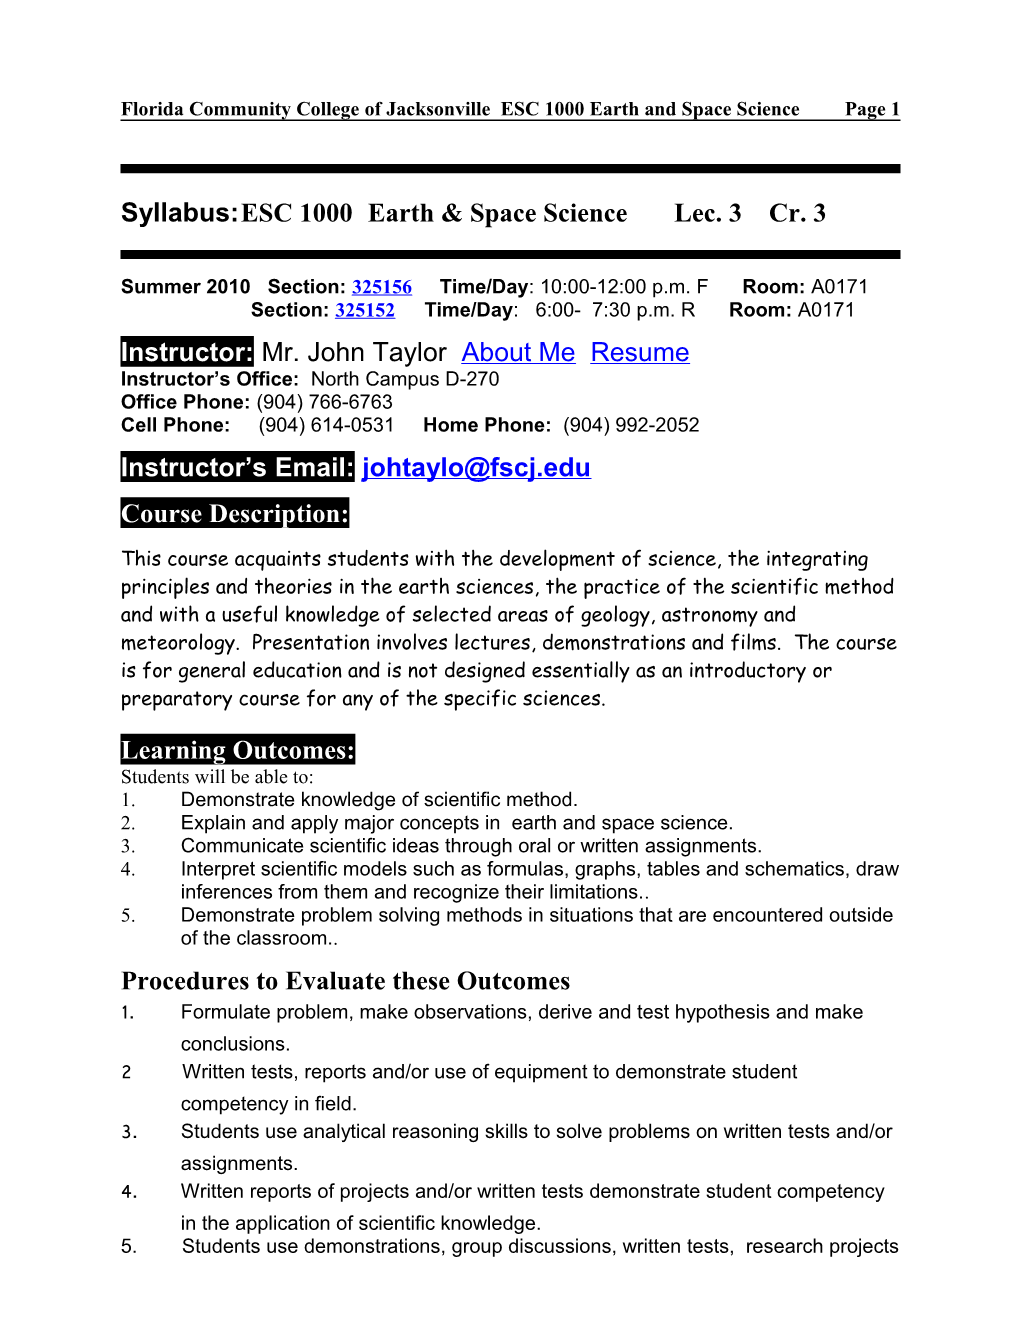 Florida Community College of Jacksonville ESC 1000 Earth and Space Science Page 1